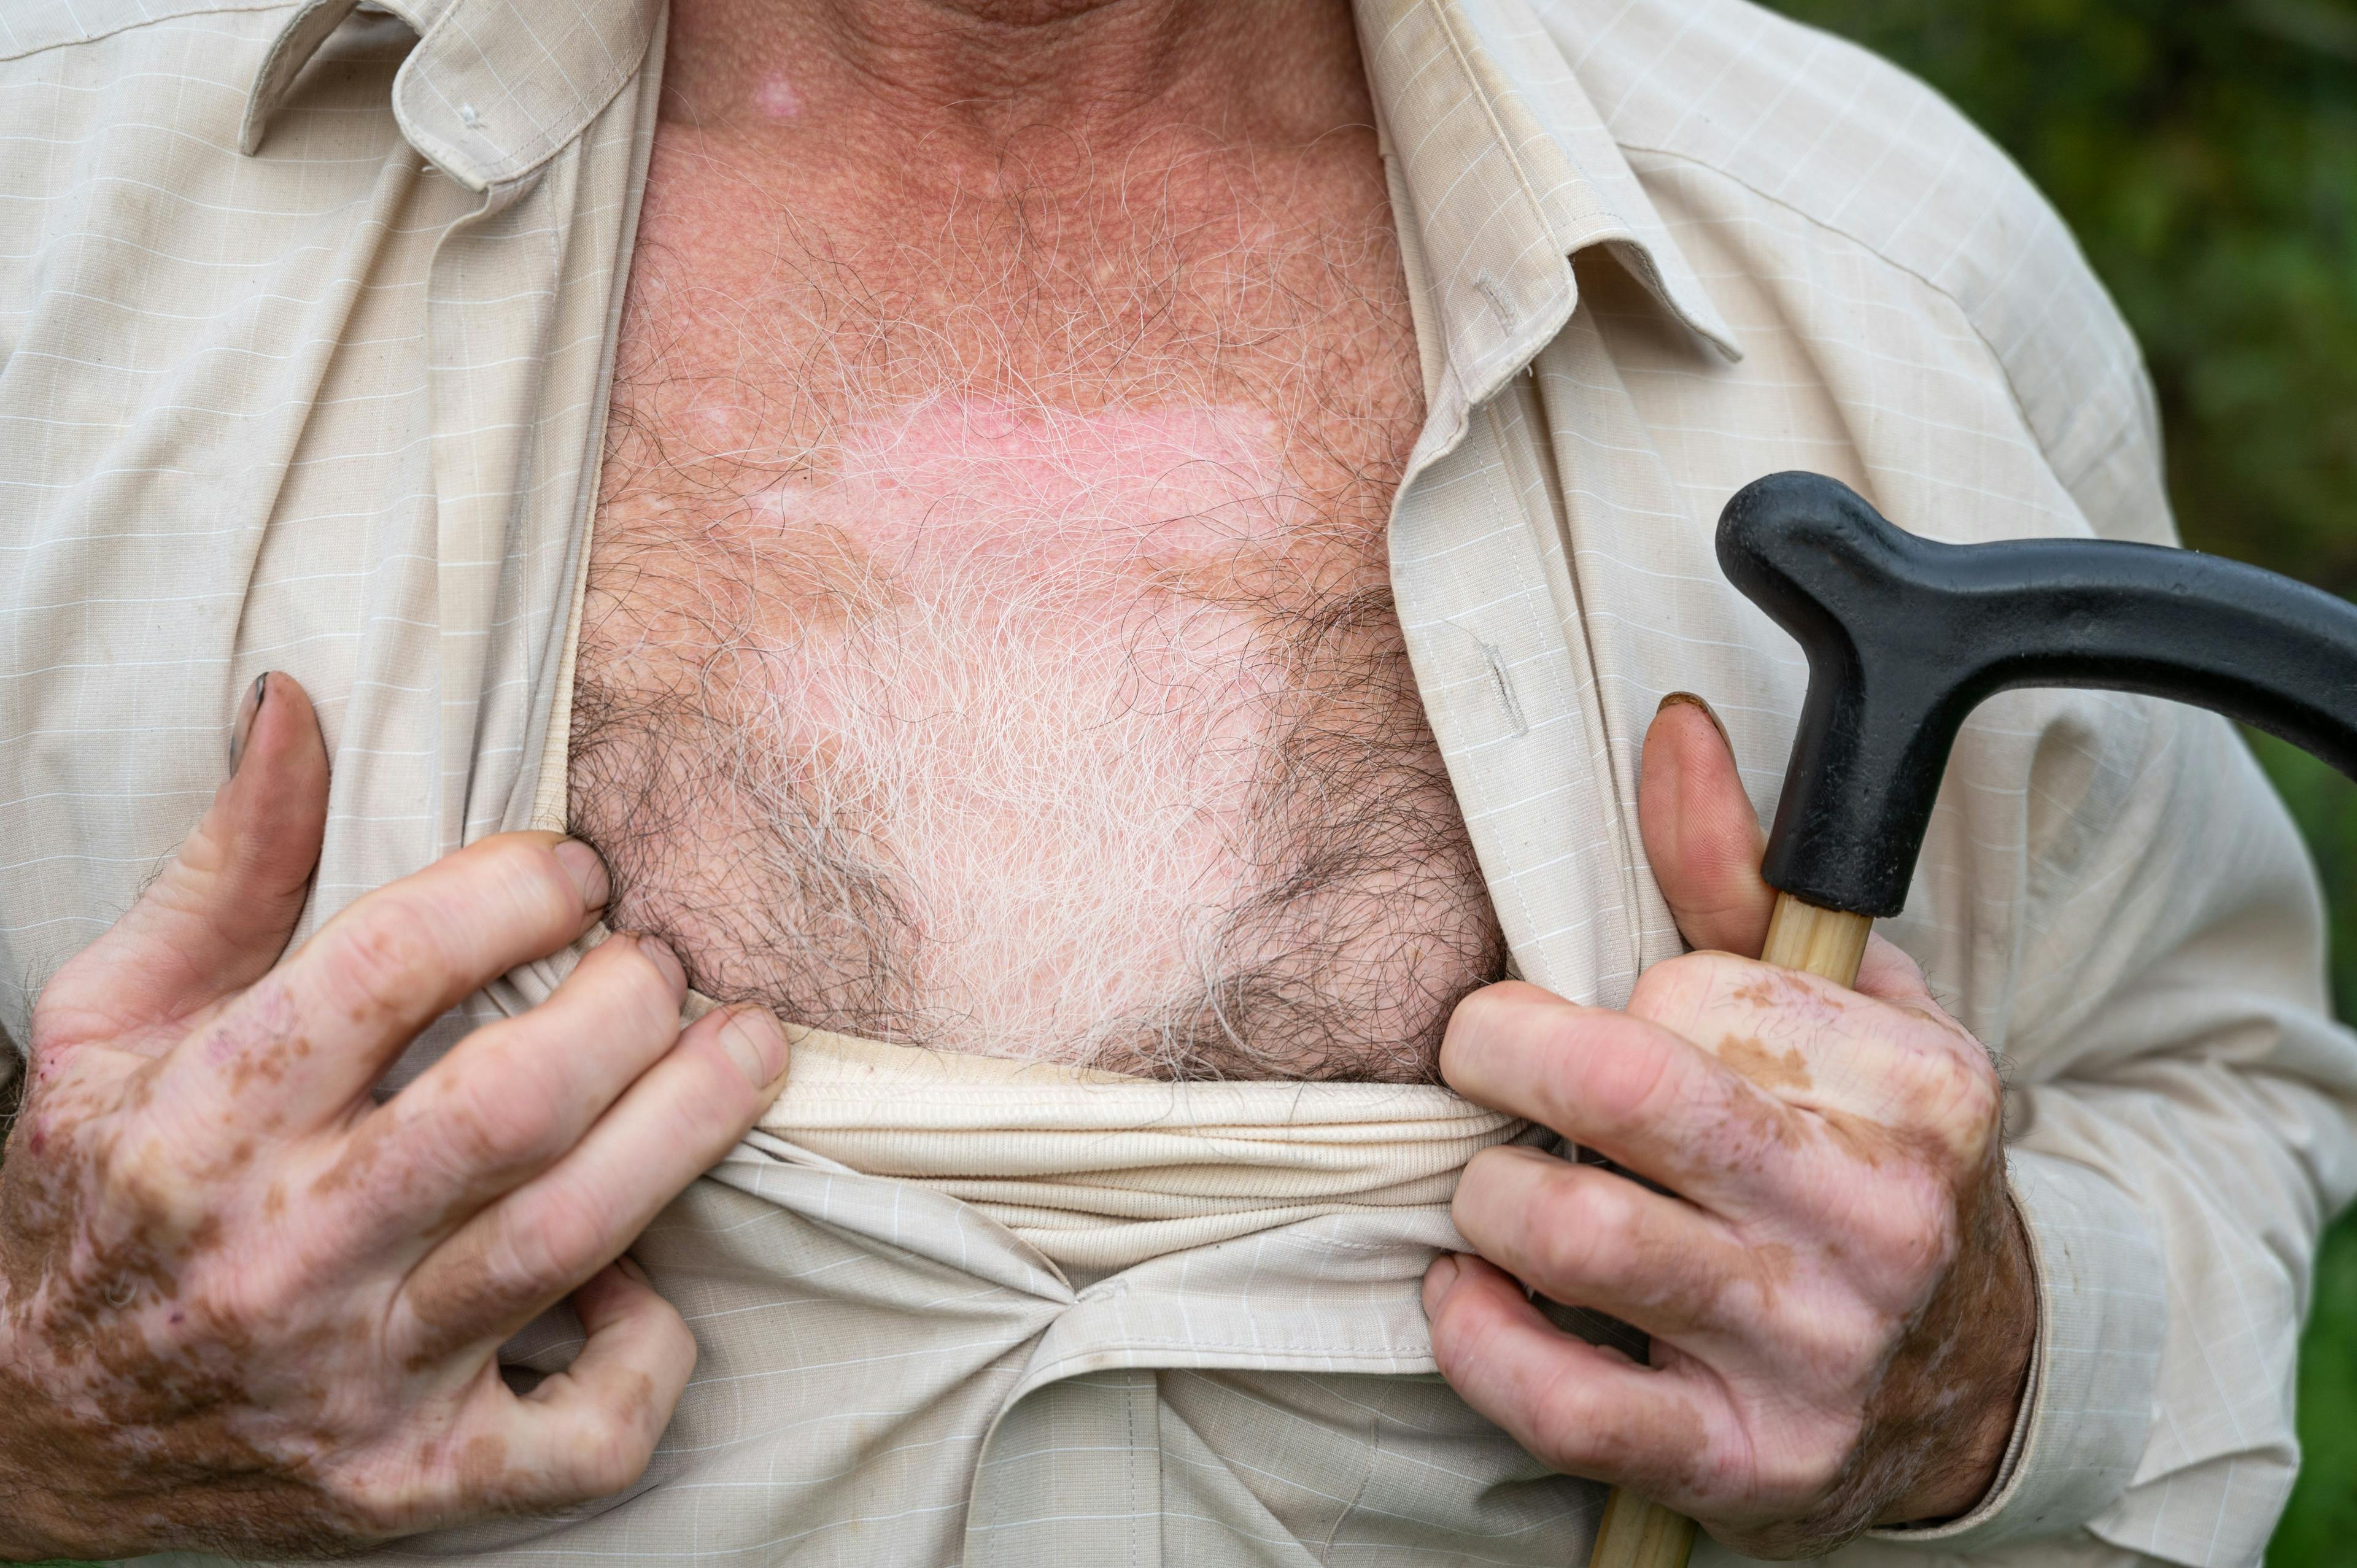 Older male with vitiligo on the hands and chest